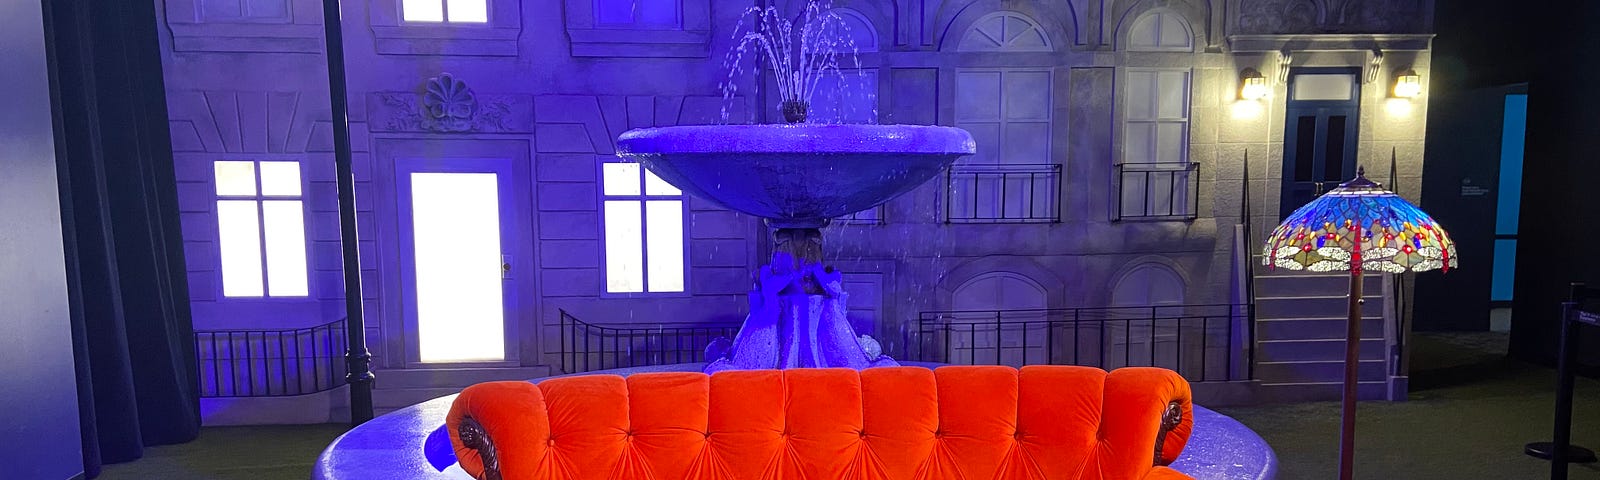 The orange couch shown in Friends’ opening credits.